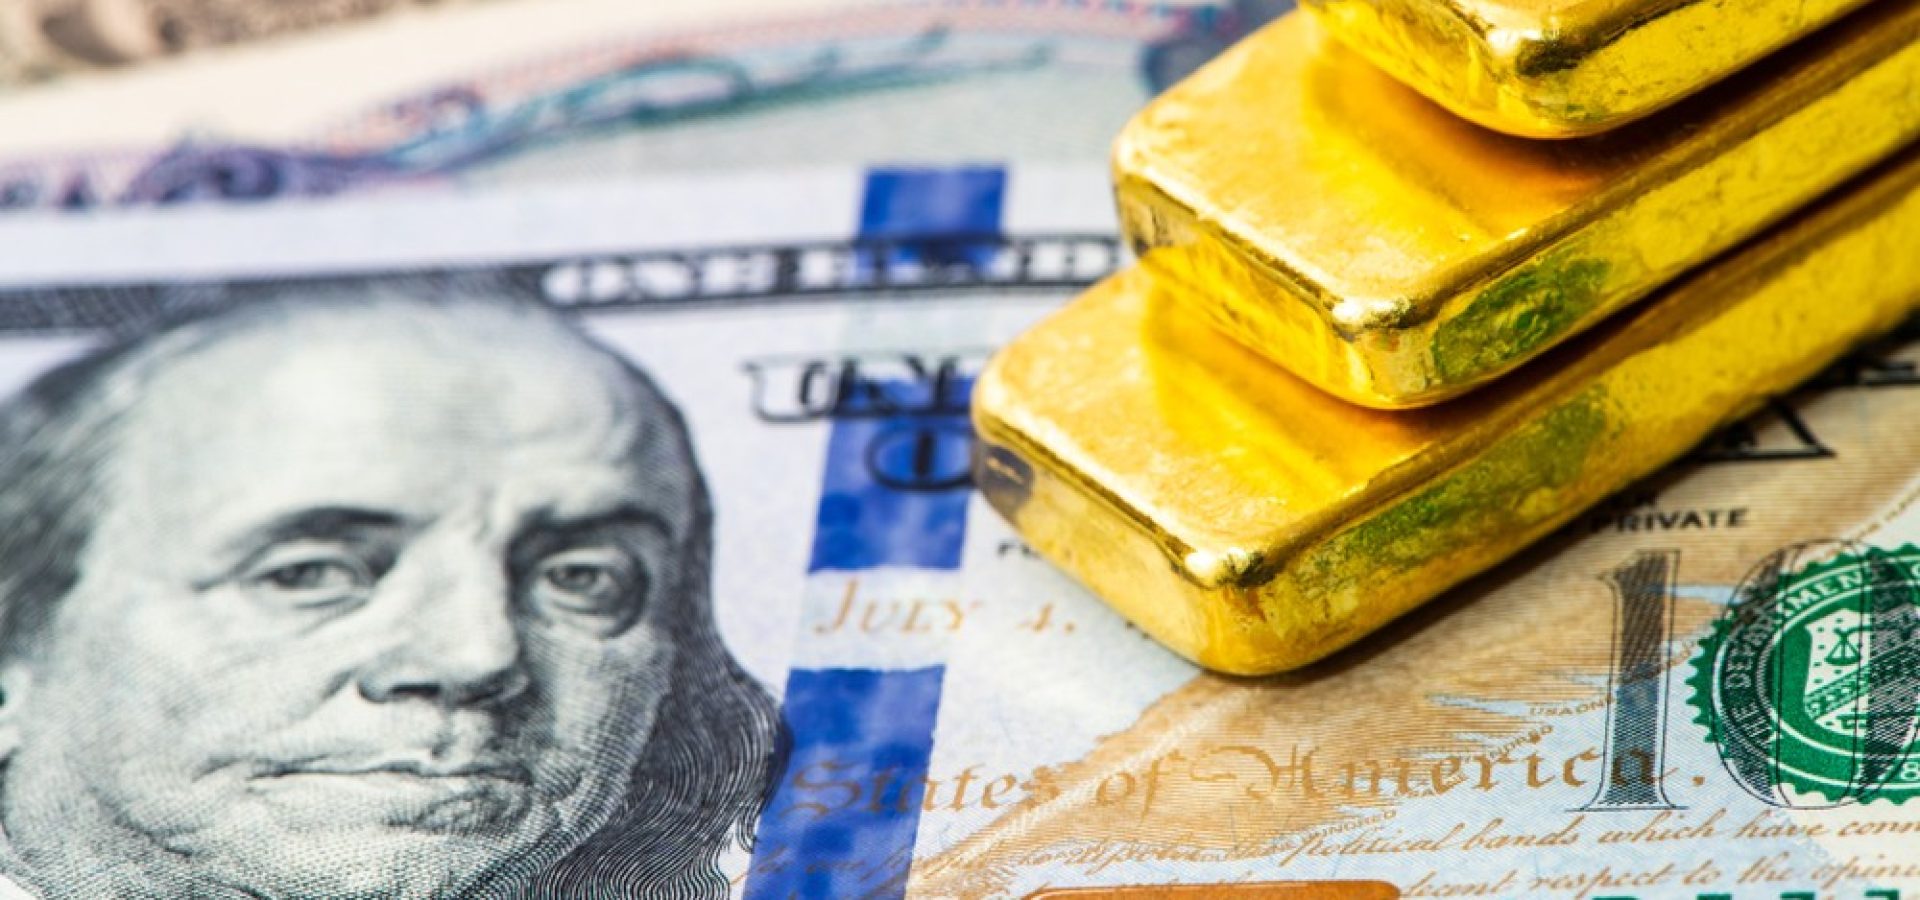 Fed stimulus has hurt the dollar and boosted gold